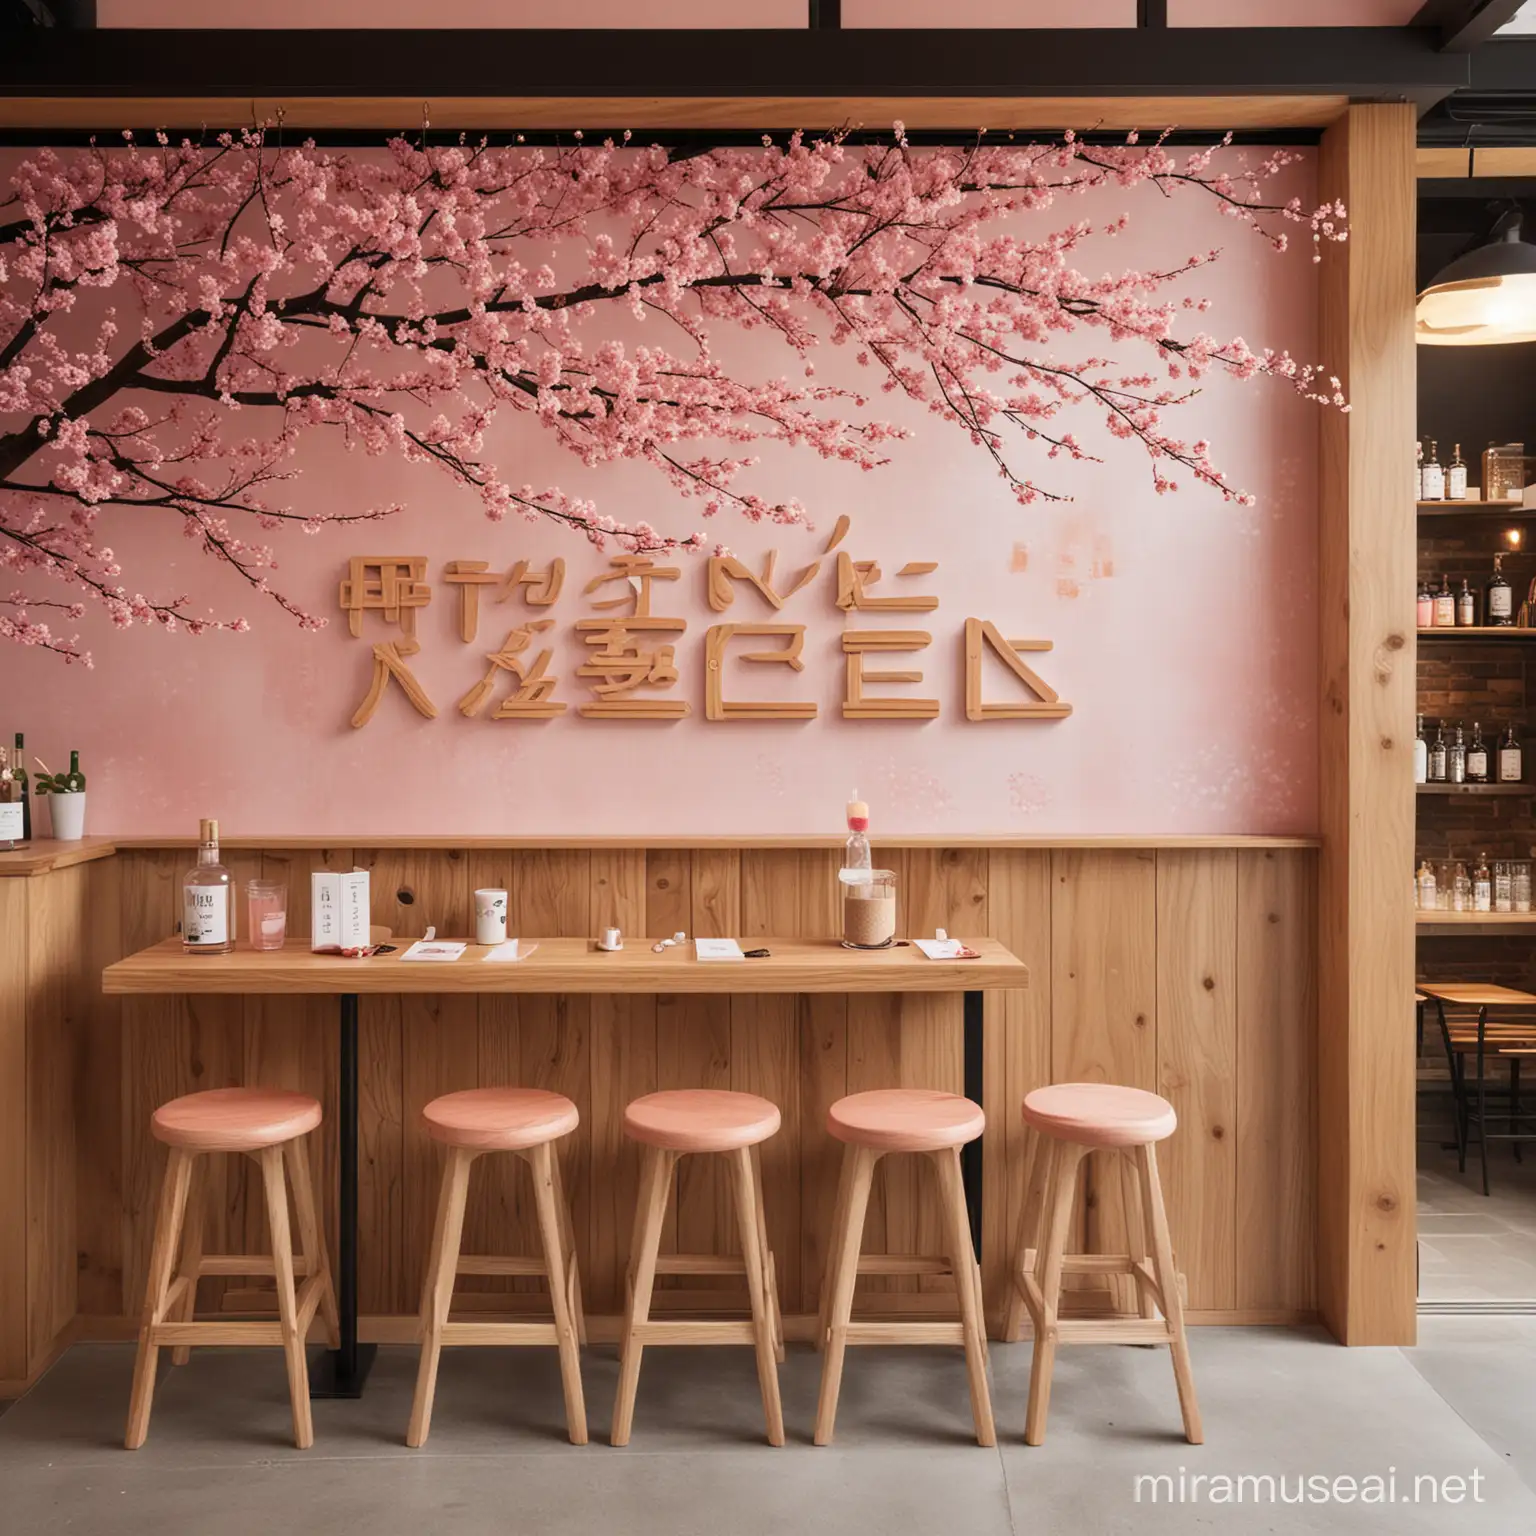 Japanese Ramen Bar with Cherry Blossoms Contemporary Artwork of Ramen and Gin Fusion